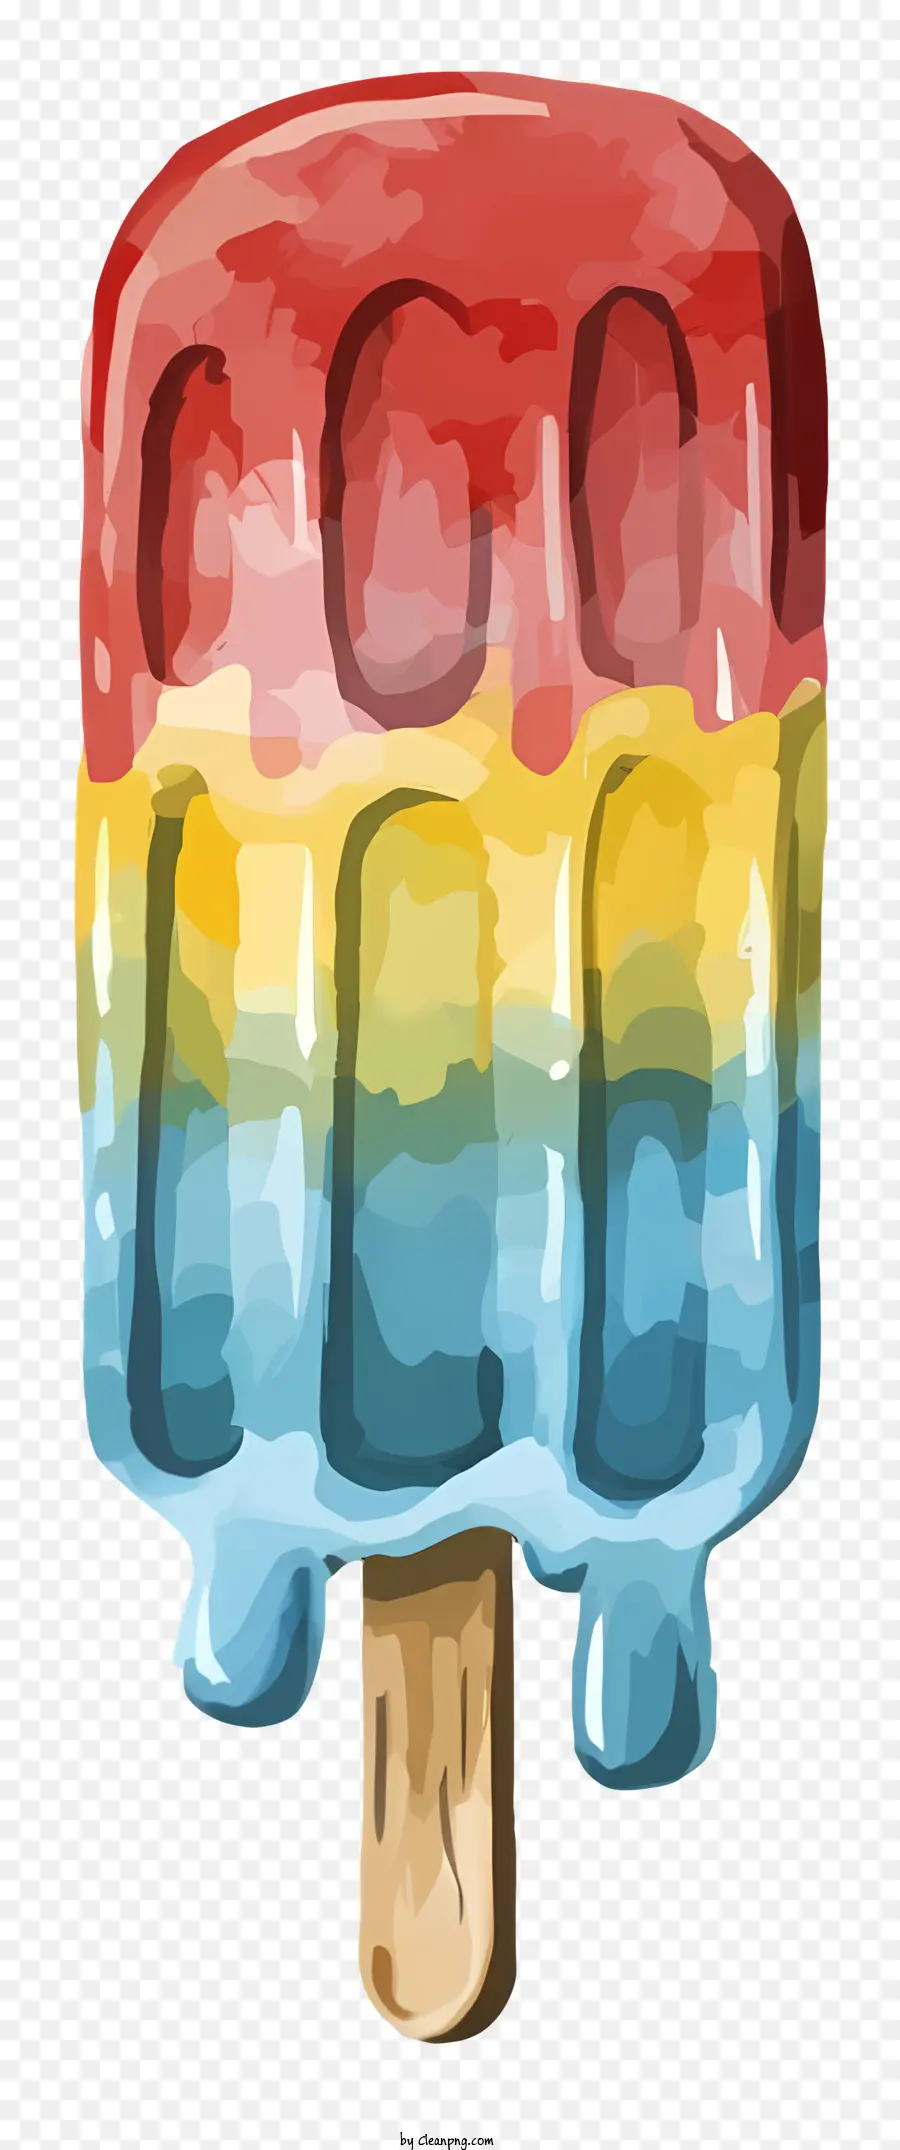 rainbow popsicle colorful popsicle popsicle on a stick textured popsicle gradient colors